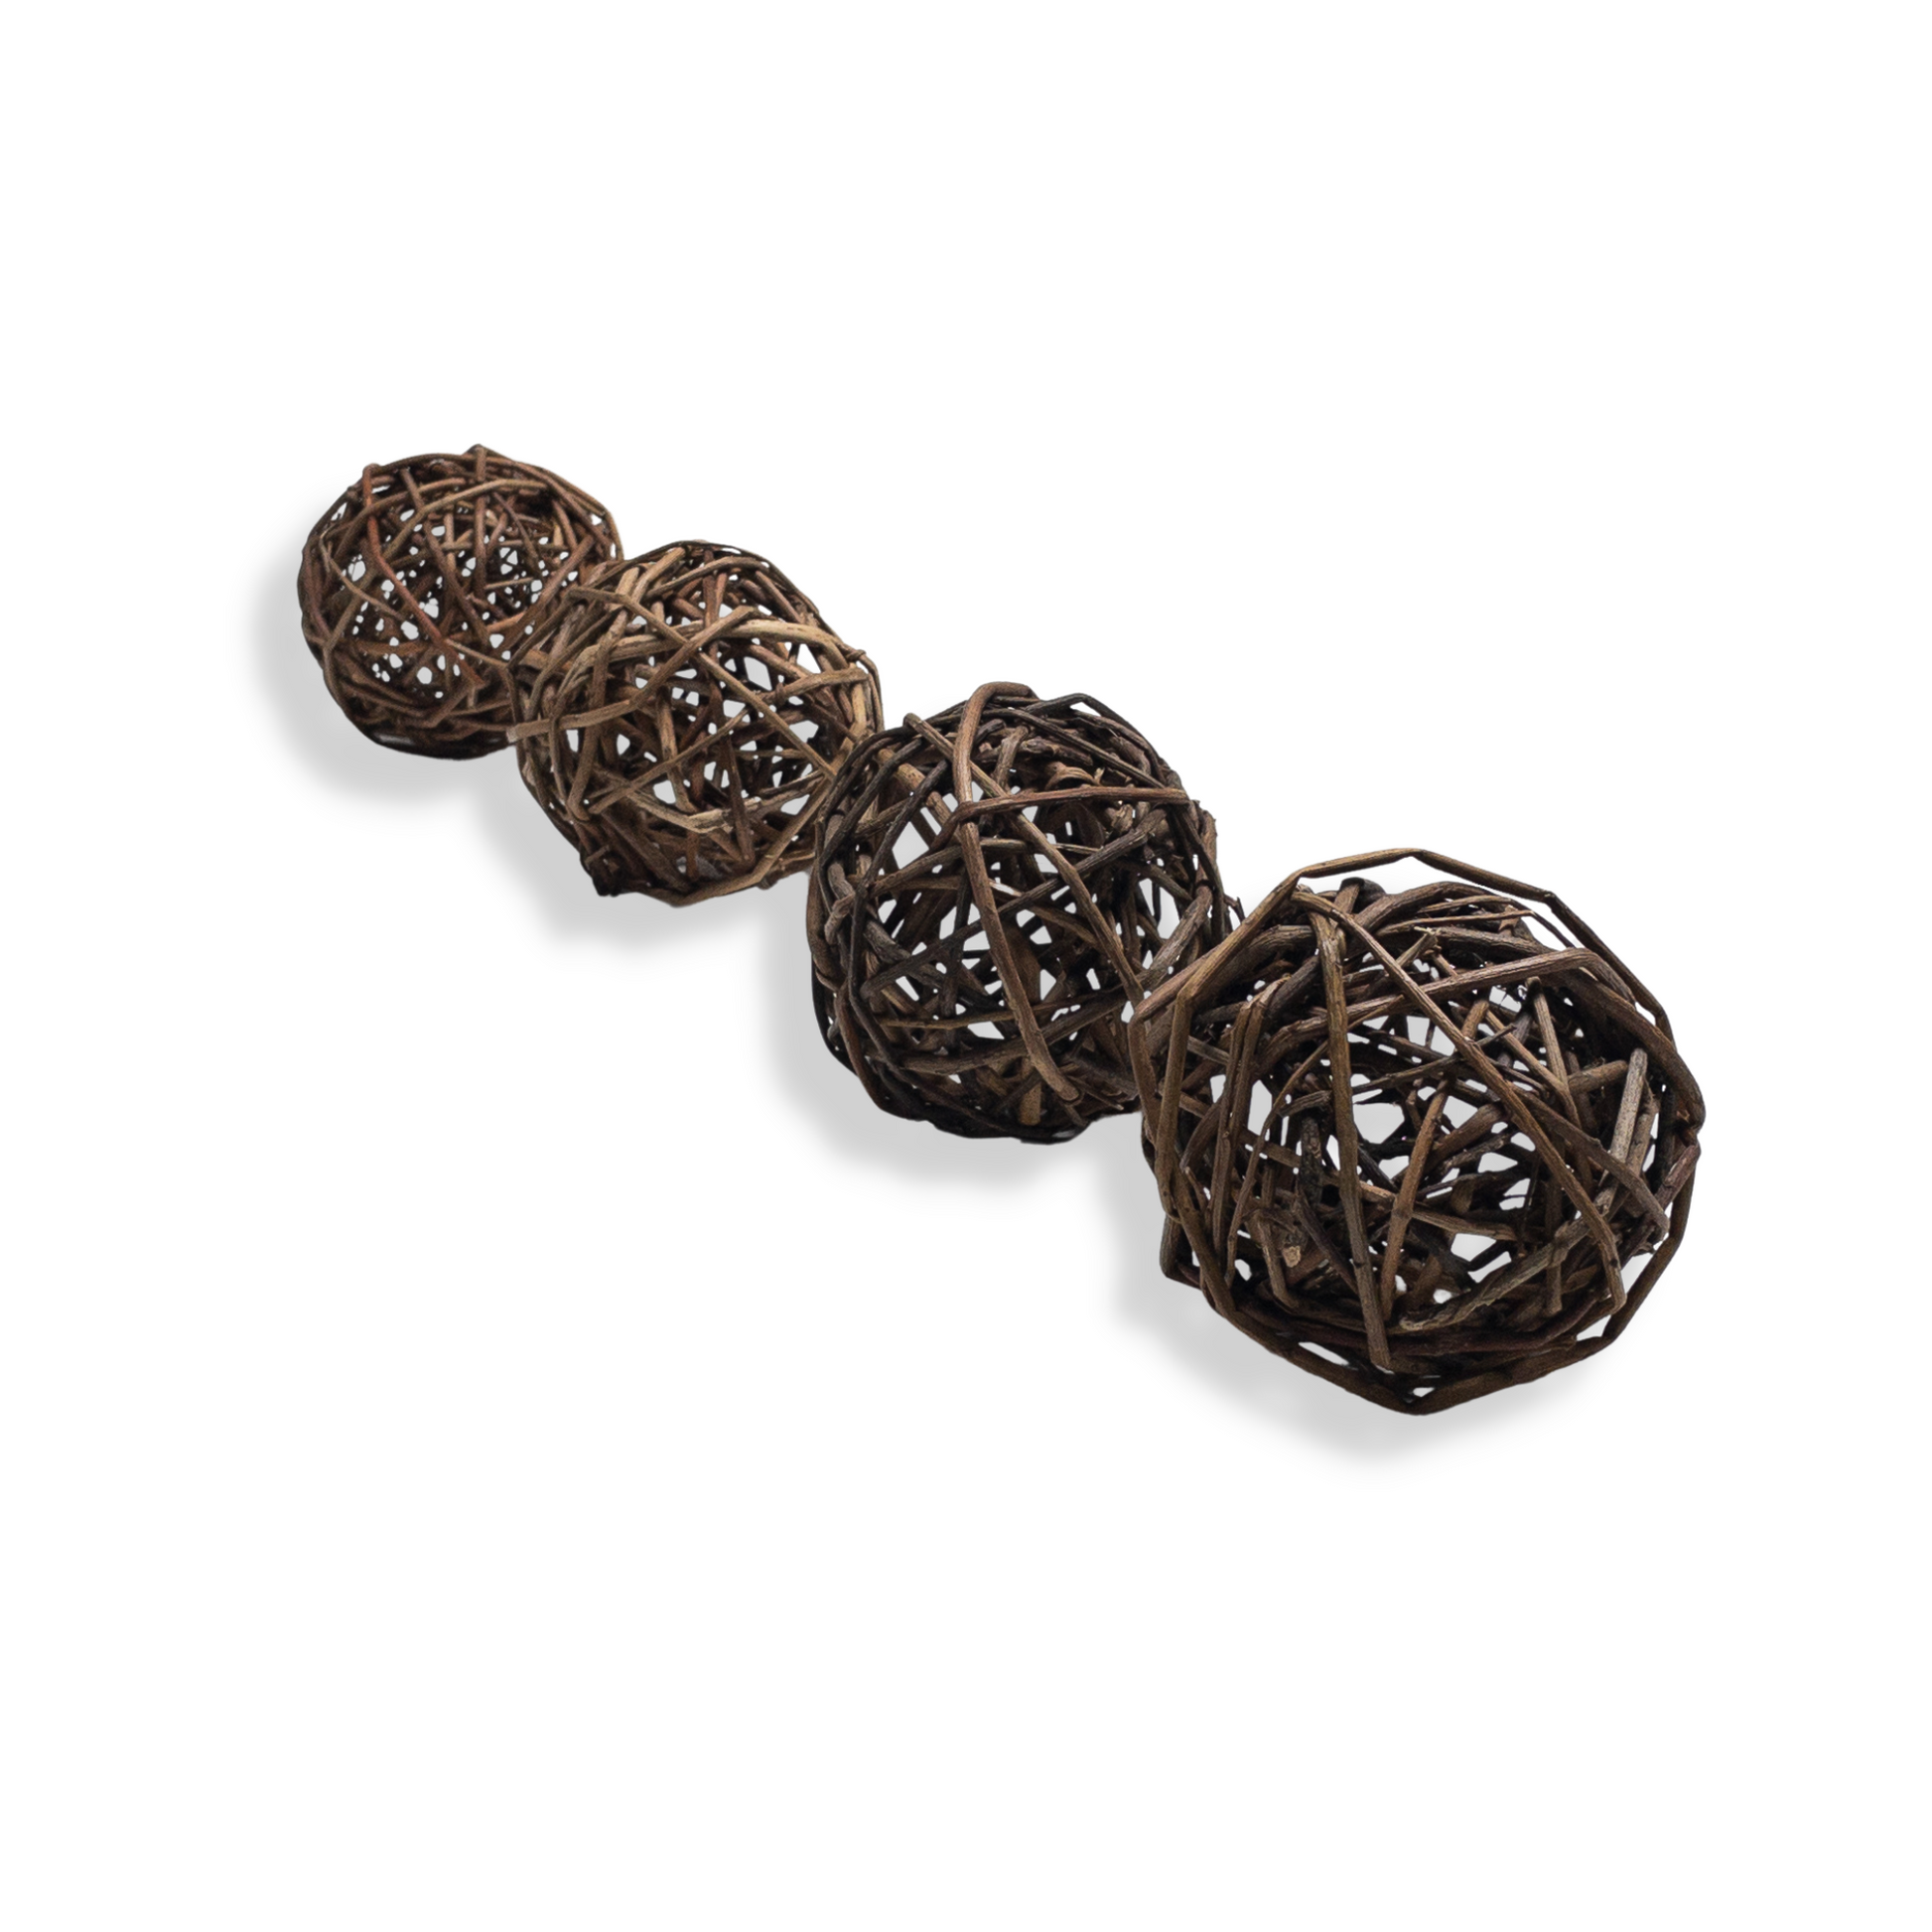 Solid All Natural Willow Chew Balls - Small